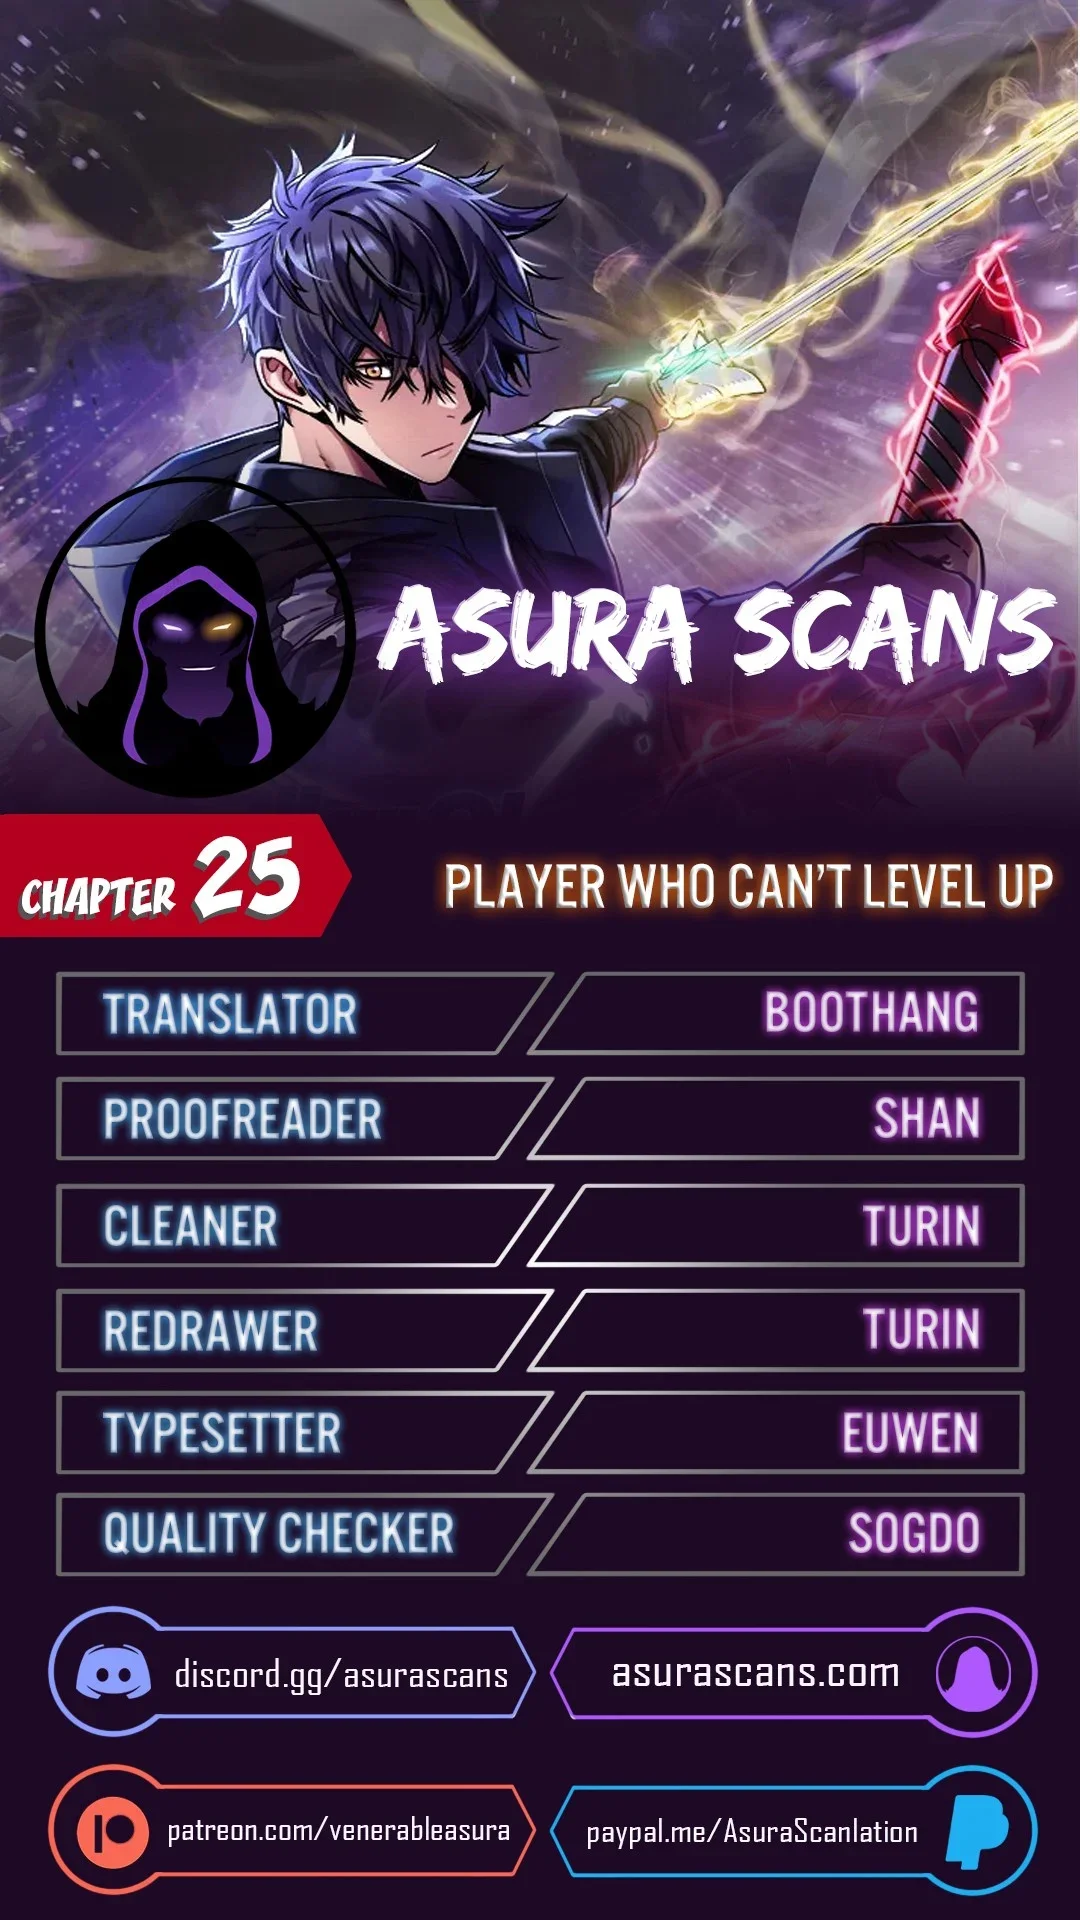 player-who-cant-level-up-chap-25-0